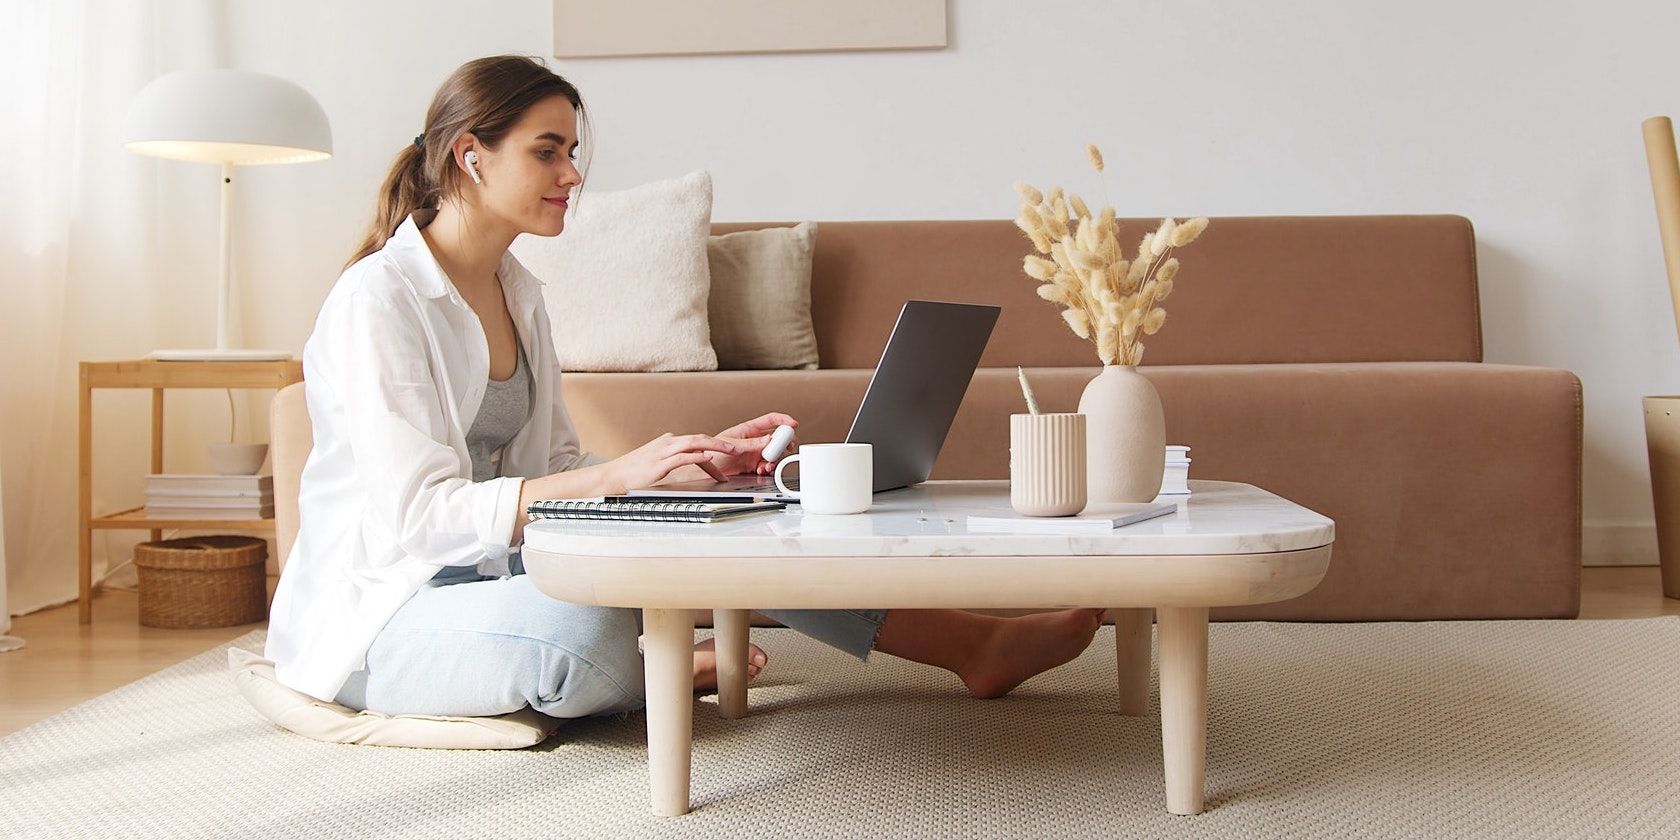 A woman sitting on the floor typing on her laptop at the coffee table. The room is clean and tranquil with lots of beige colors